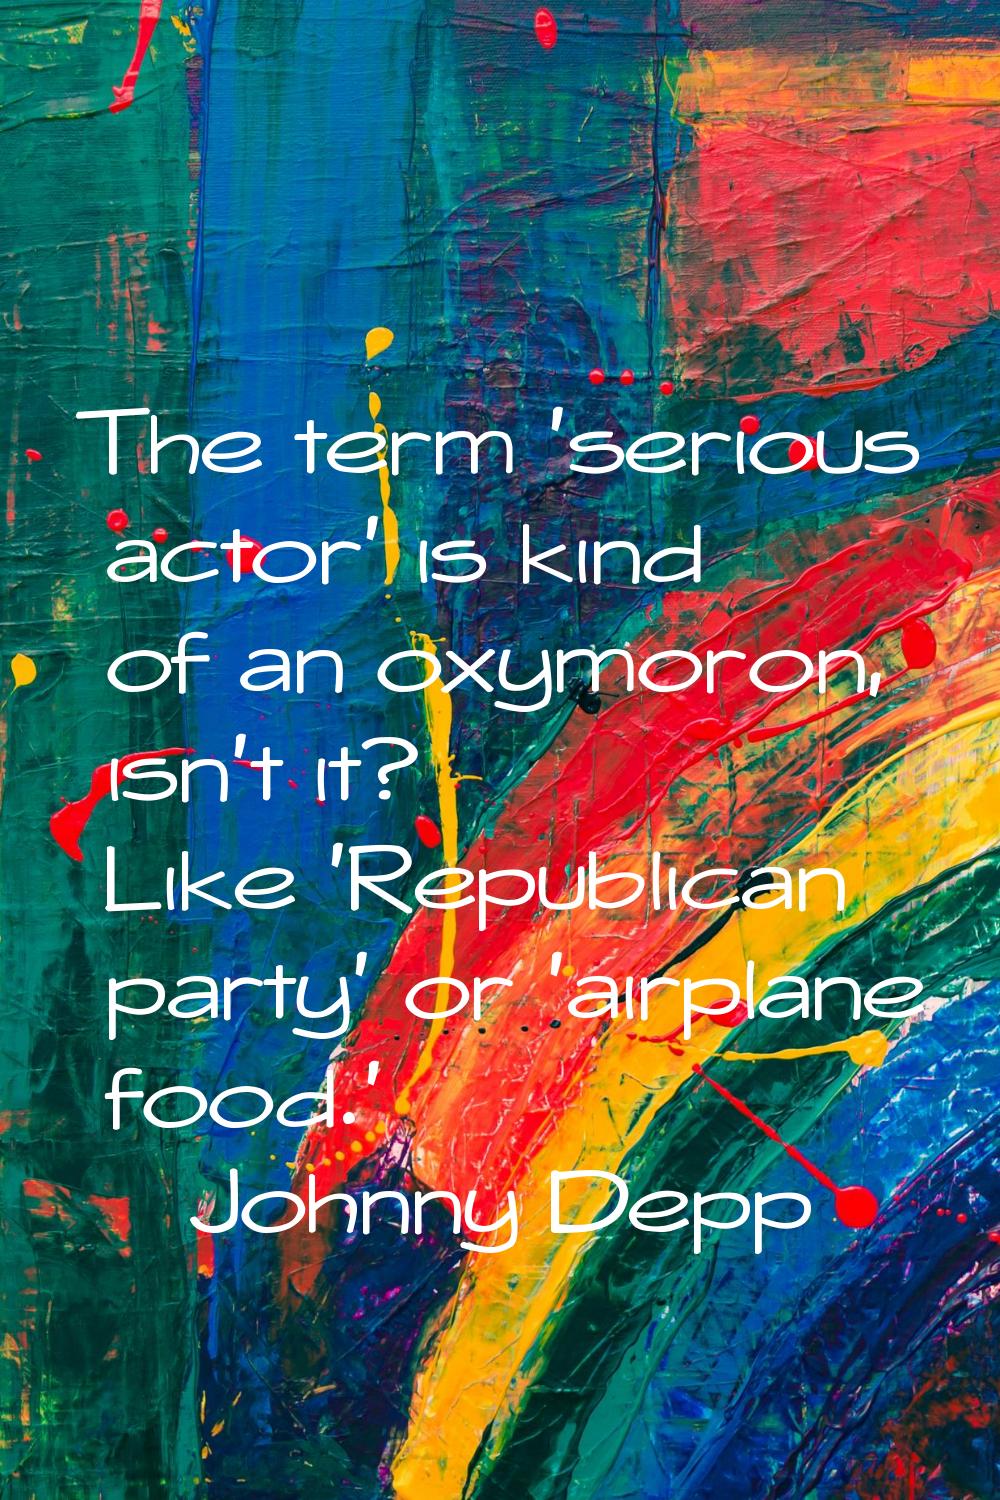 The term 'serious actor' is kind of an oxymoron, isn't it? Like 'Republican party' or 'airplane foo